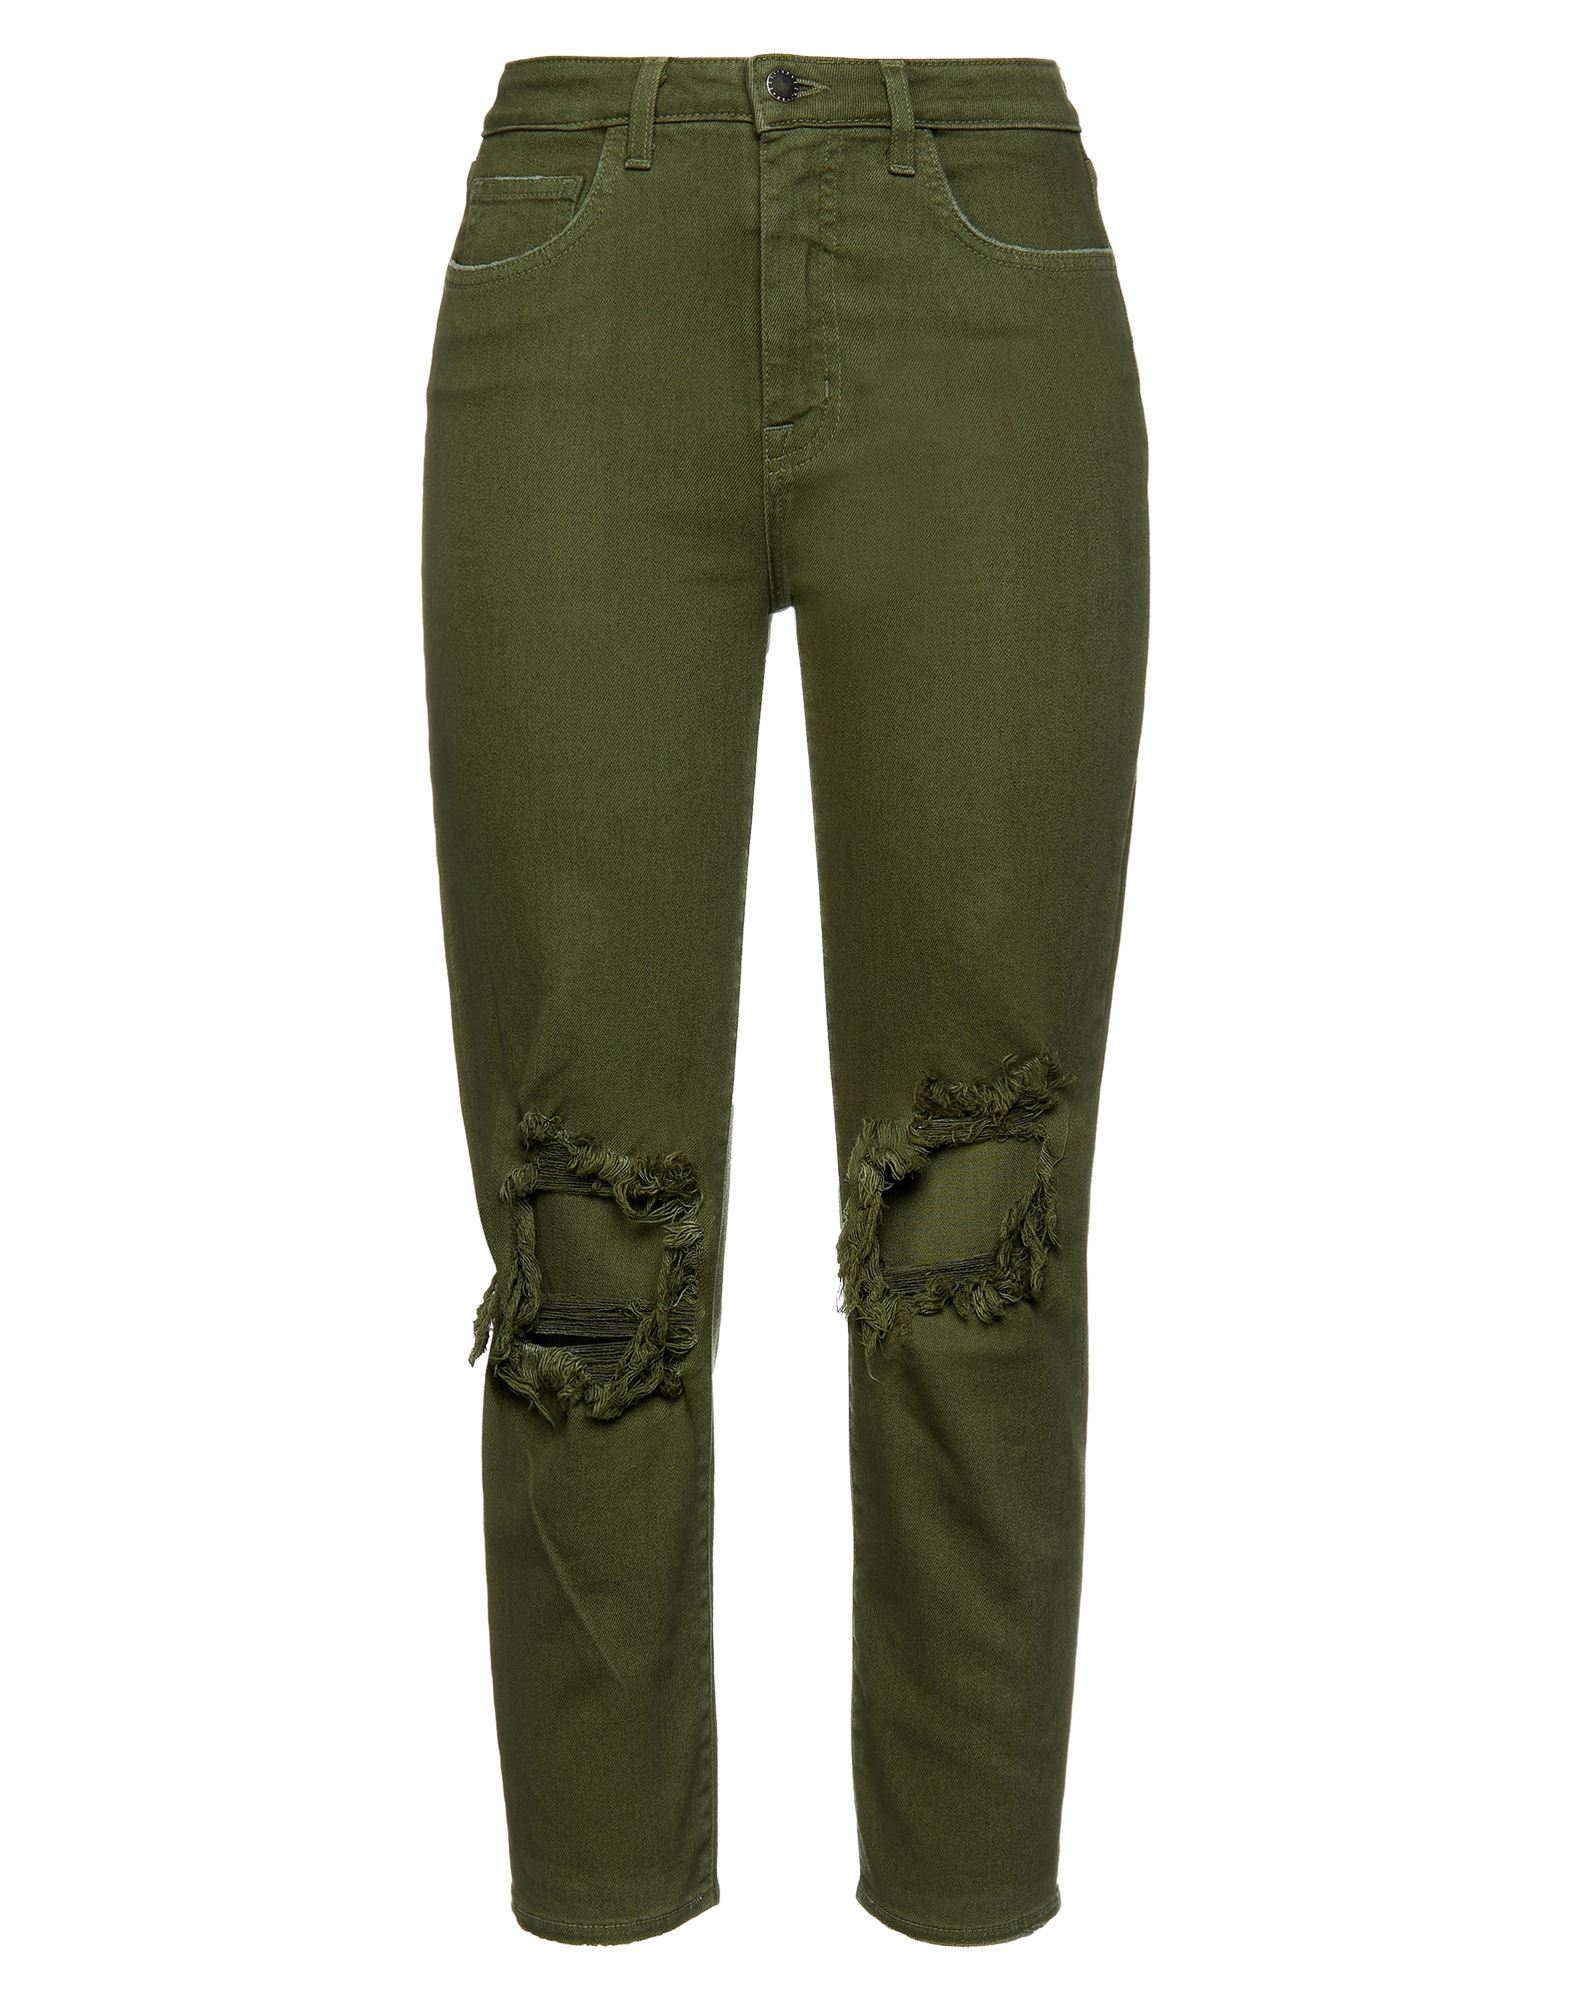 L Agence L'agence Woman Jeans Military Green Size 25 Cotton, Elastane